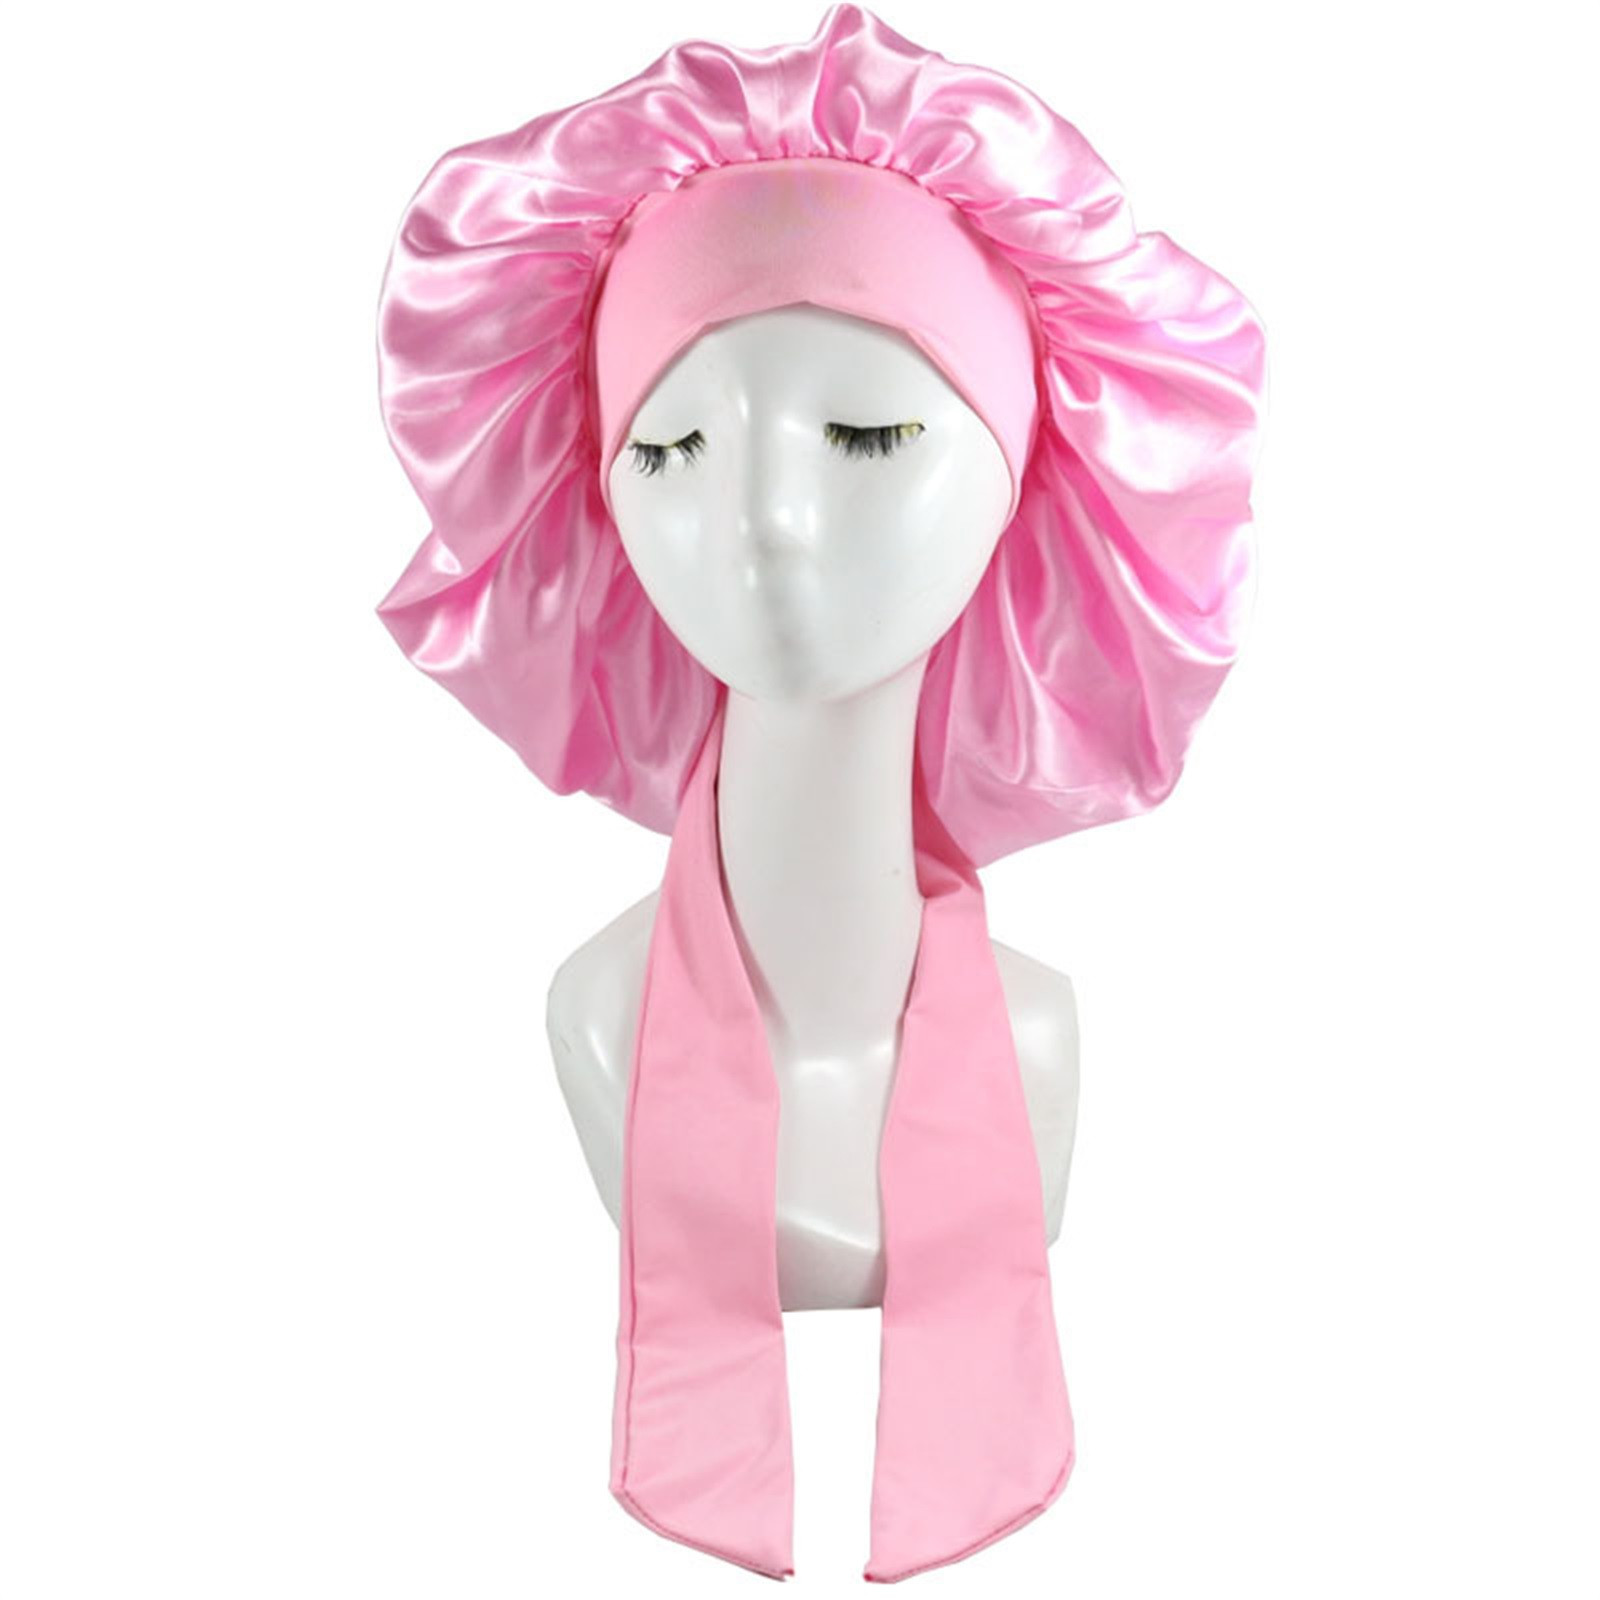 Ichuanyi Women's Satin Solid Broad-brimmed Hairband Sleep Cap Strap High Elastic Lace-up Shower Cap Women - image 1 of 2